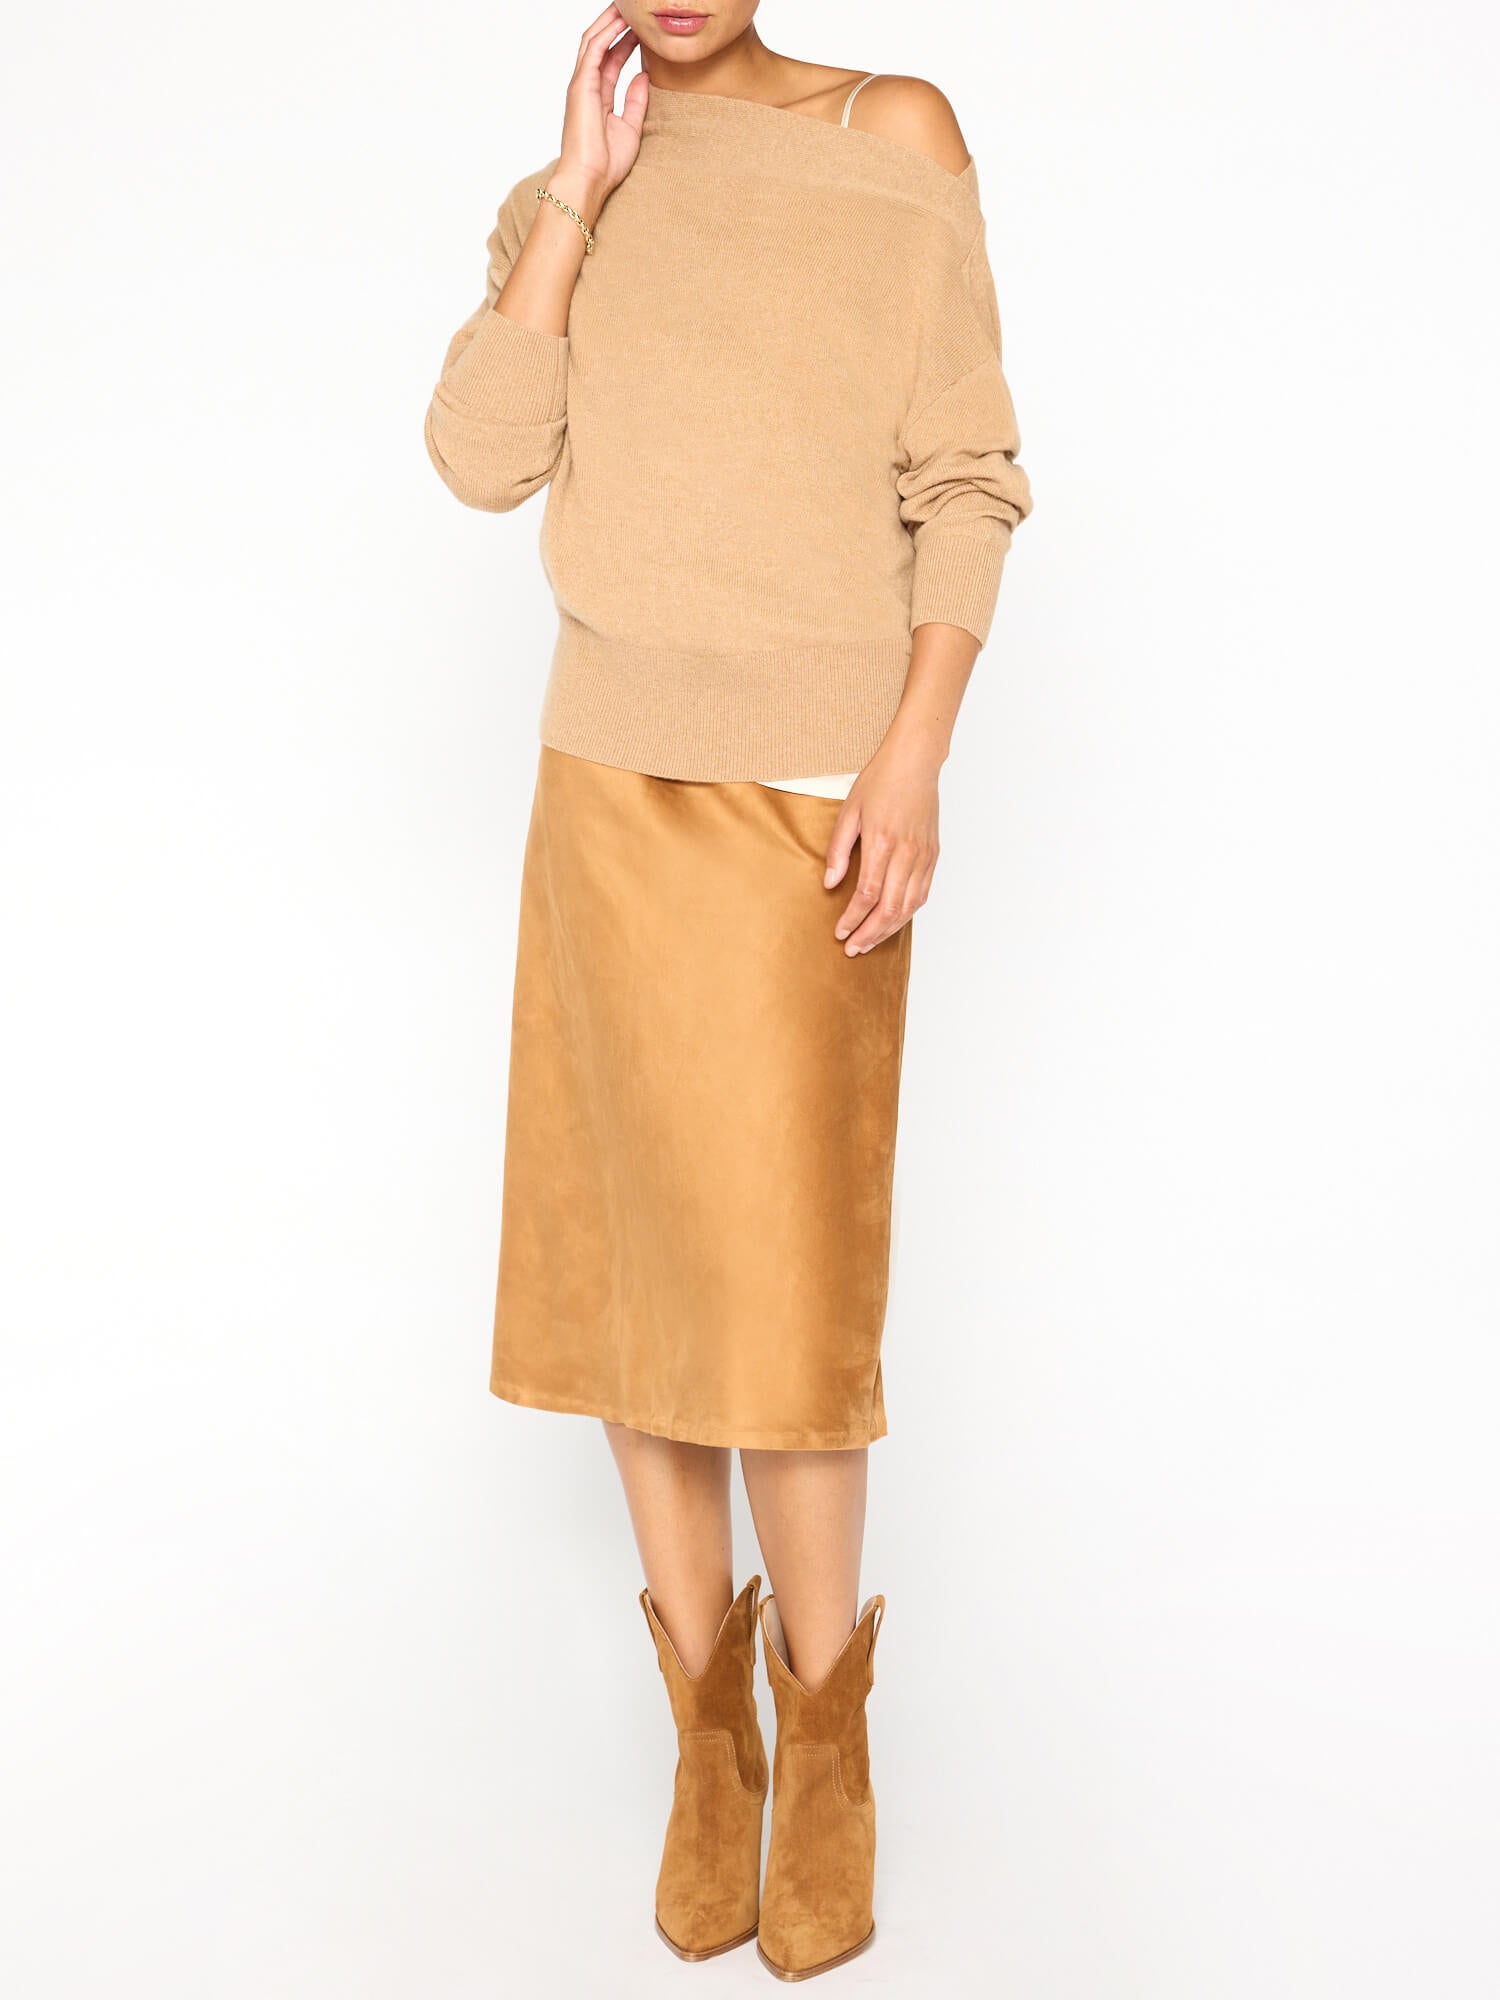 Dunne cashmere boatneck tan sweater full view